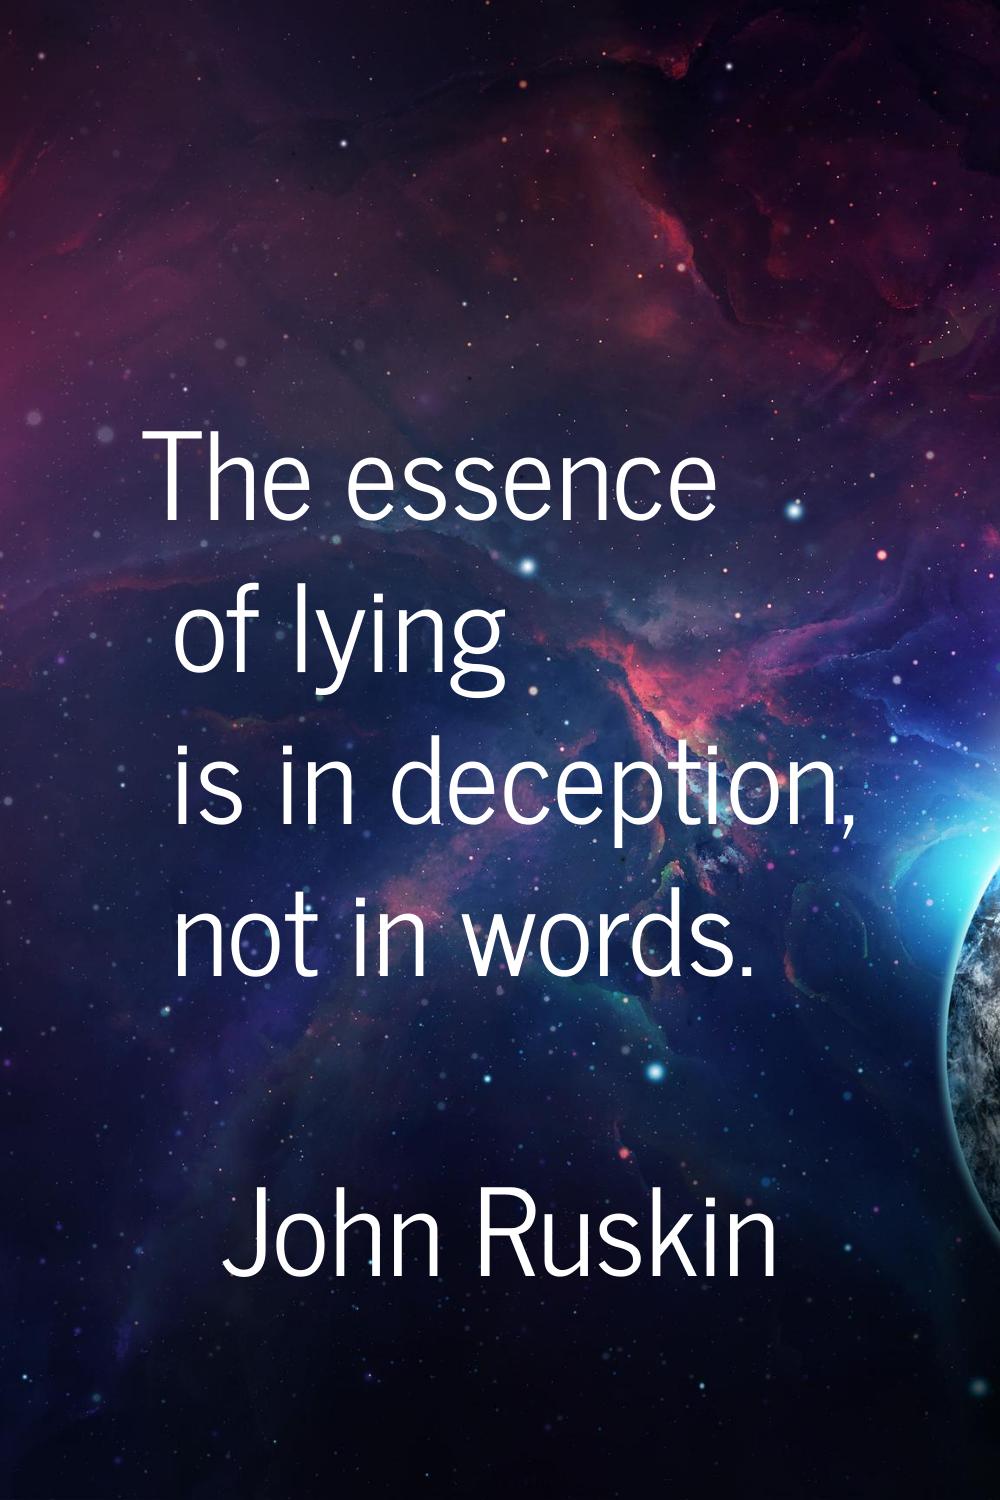 The essence of lying is in deception, not in words.